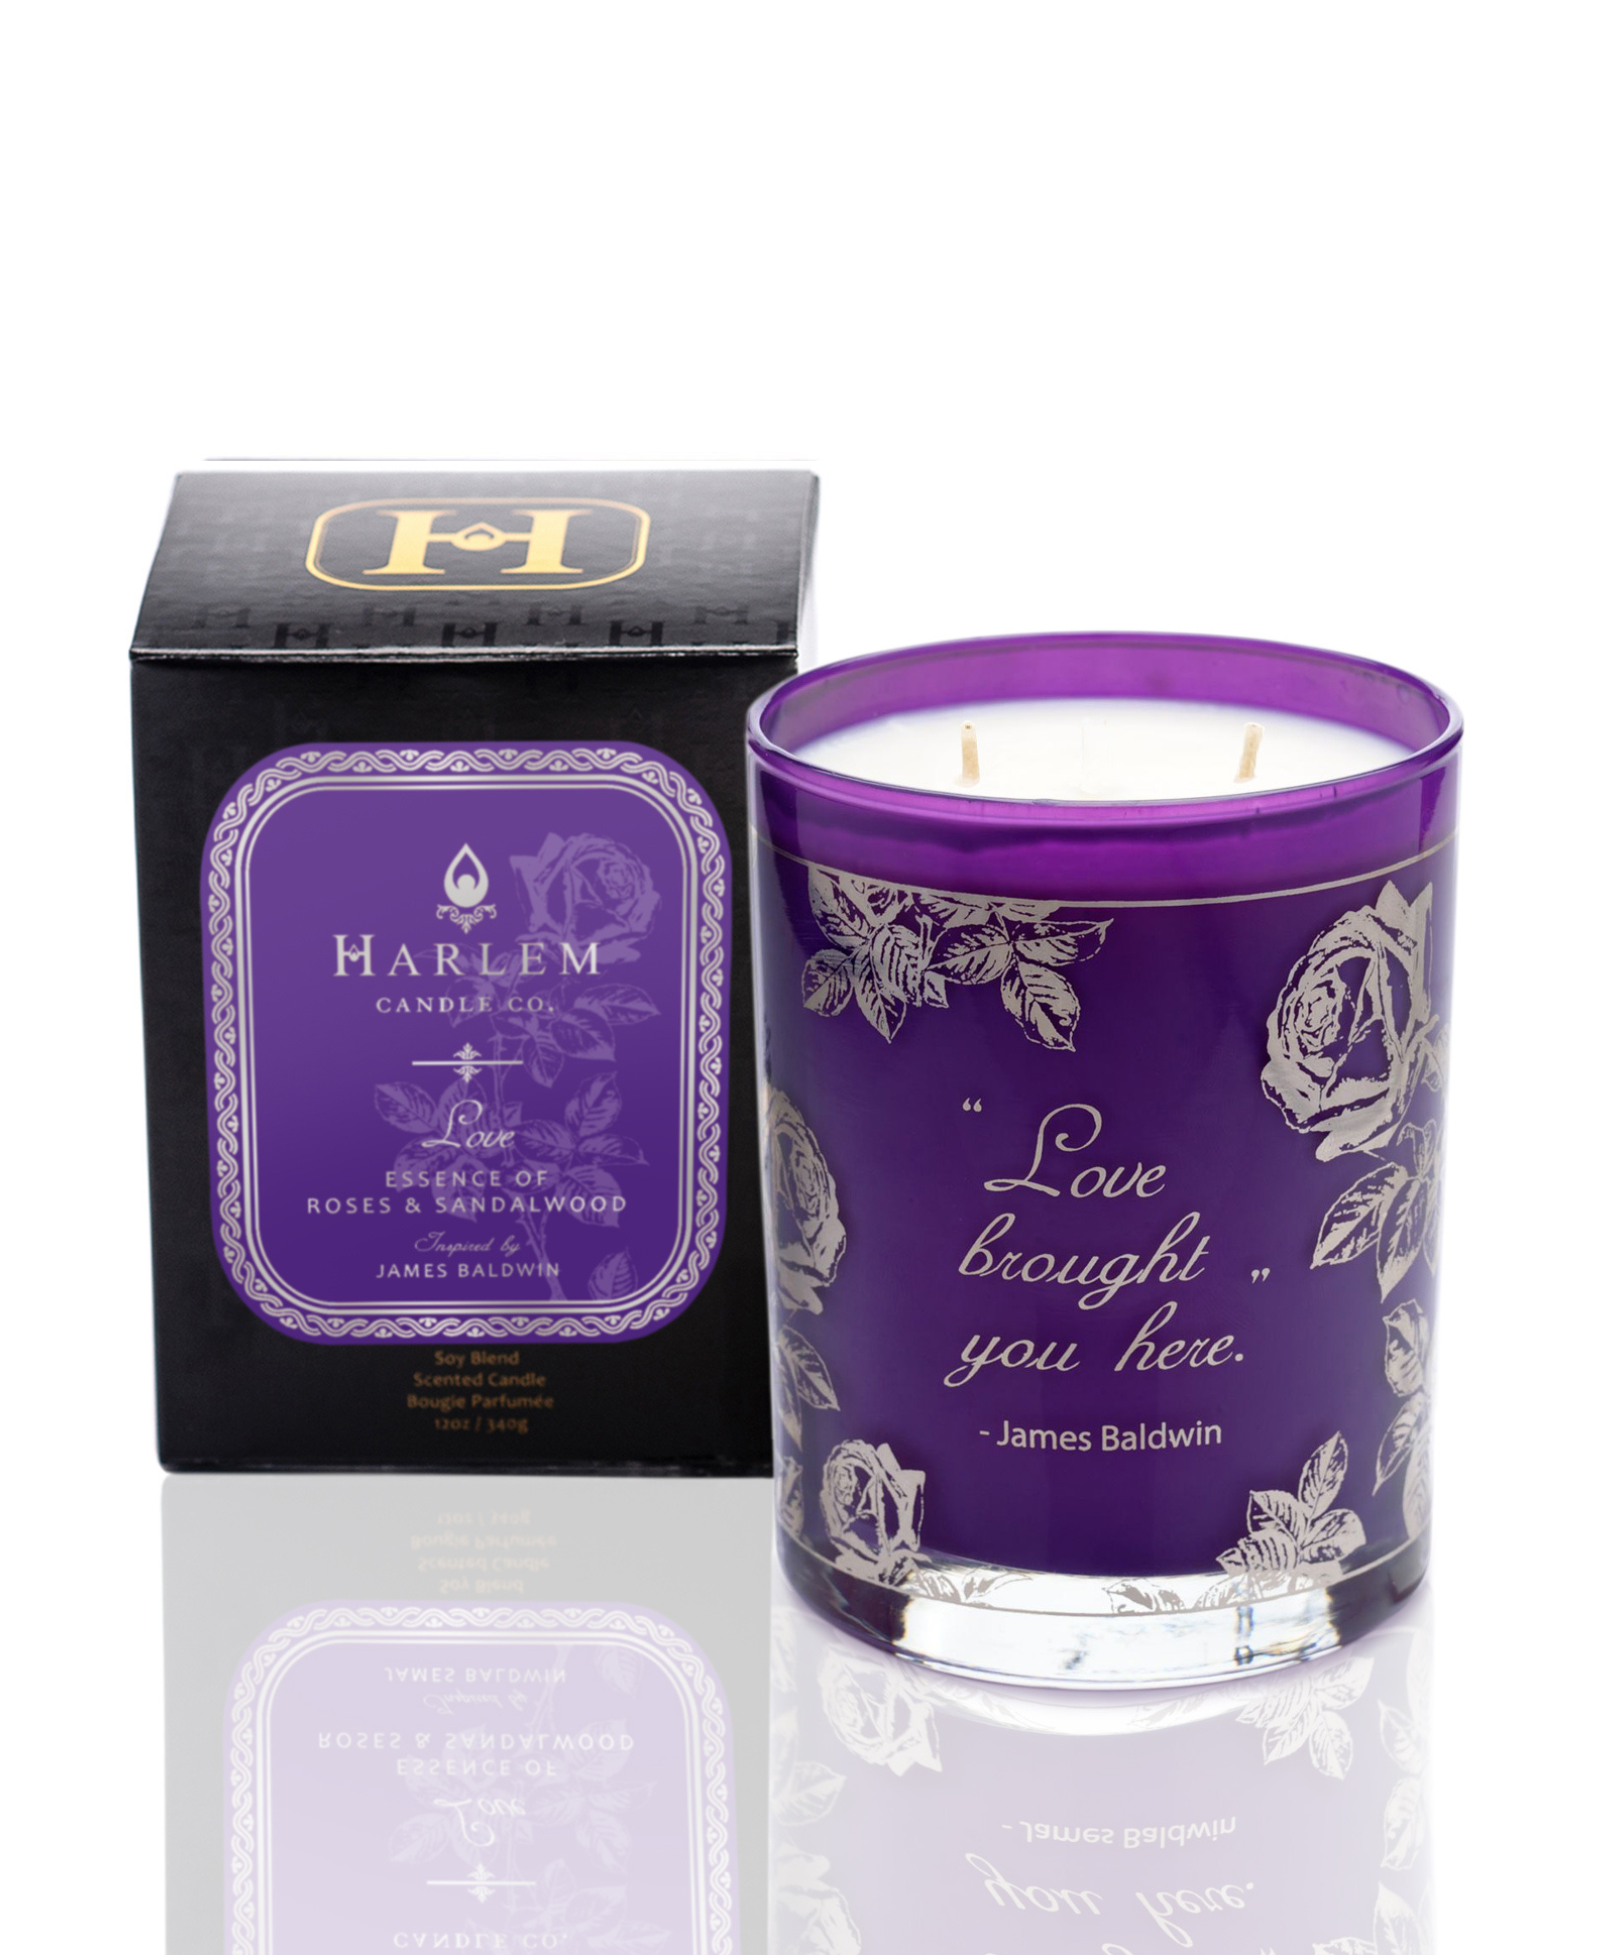 Limited edition purple and silver Love candle.  It says "Love Brought You Here" - James Baldwin. This candle is pictured next to its decorative candle box.